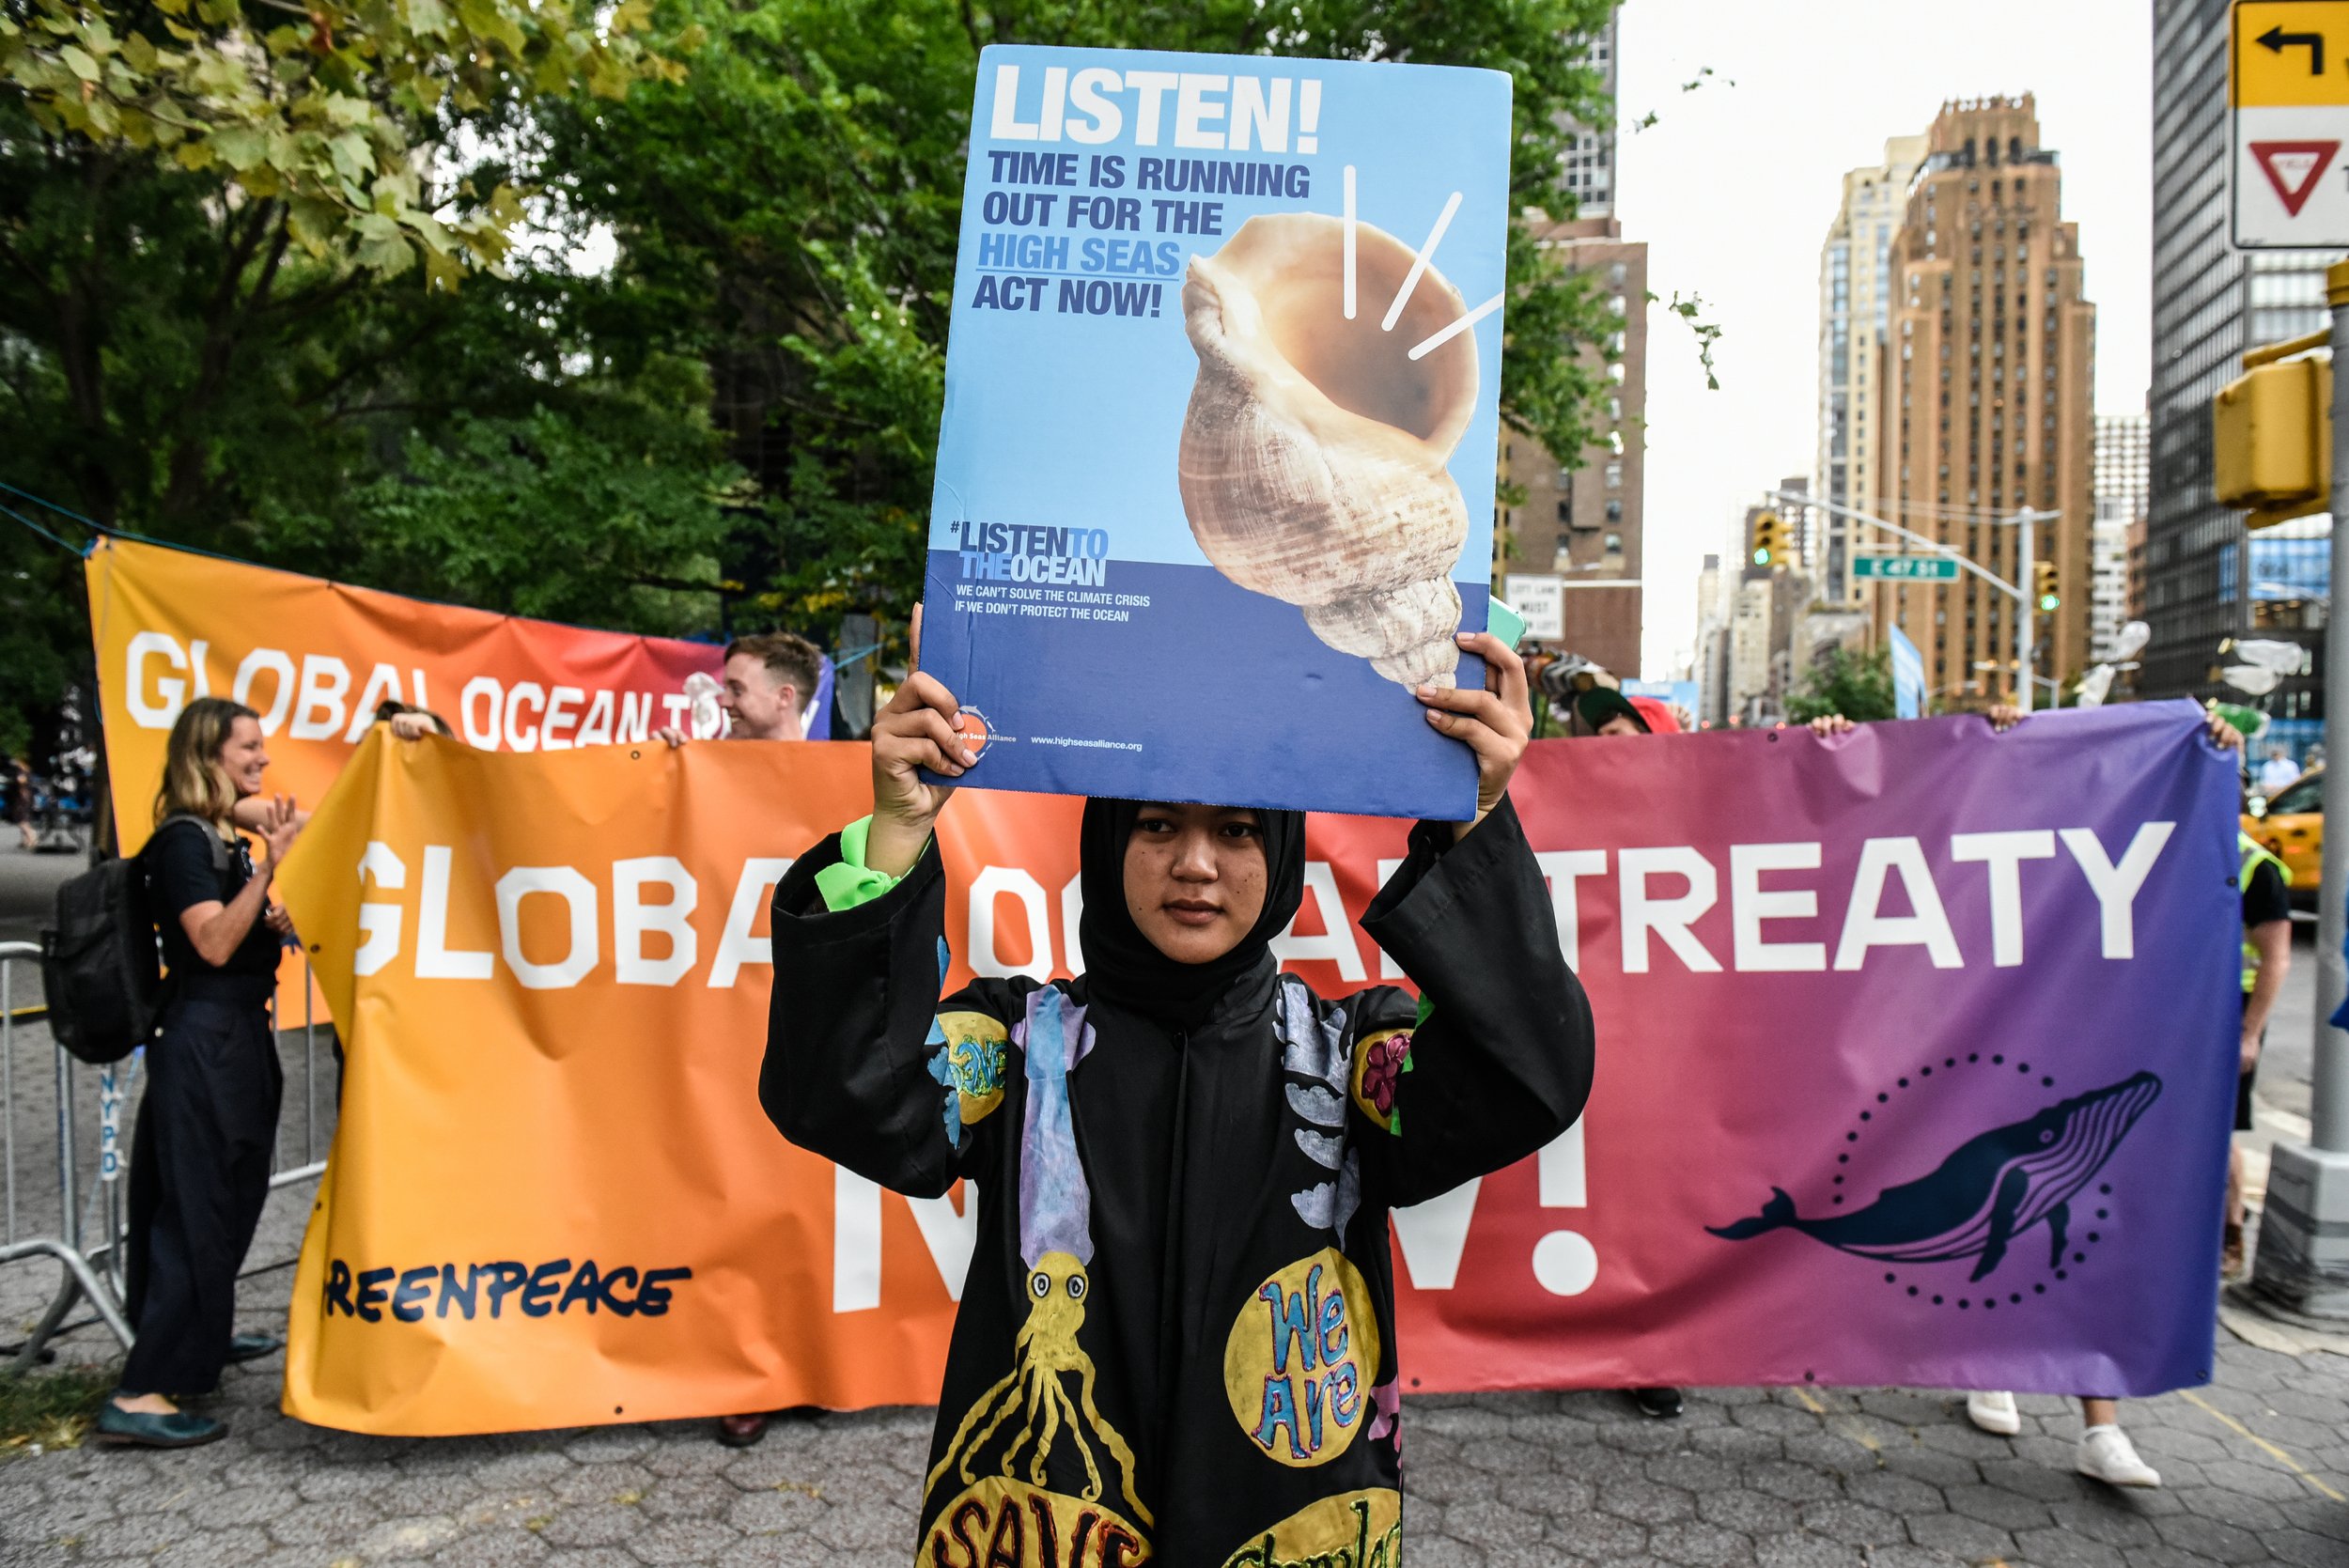 Khaireeyah Ramanyah holding a sign that reads "Listen! Time is running out for the high seas. Act Now!"